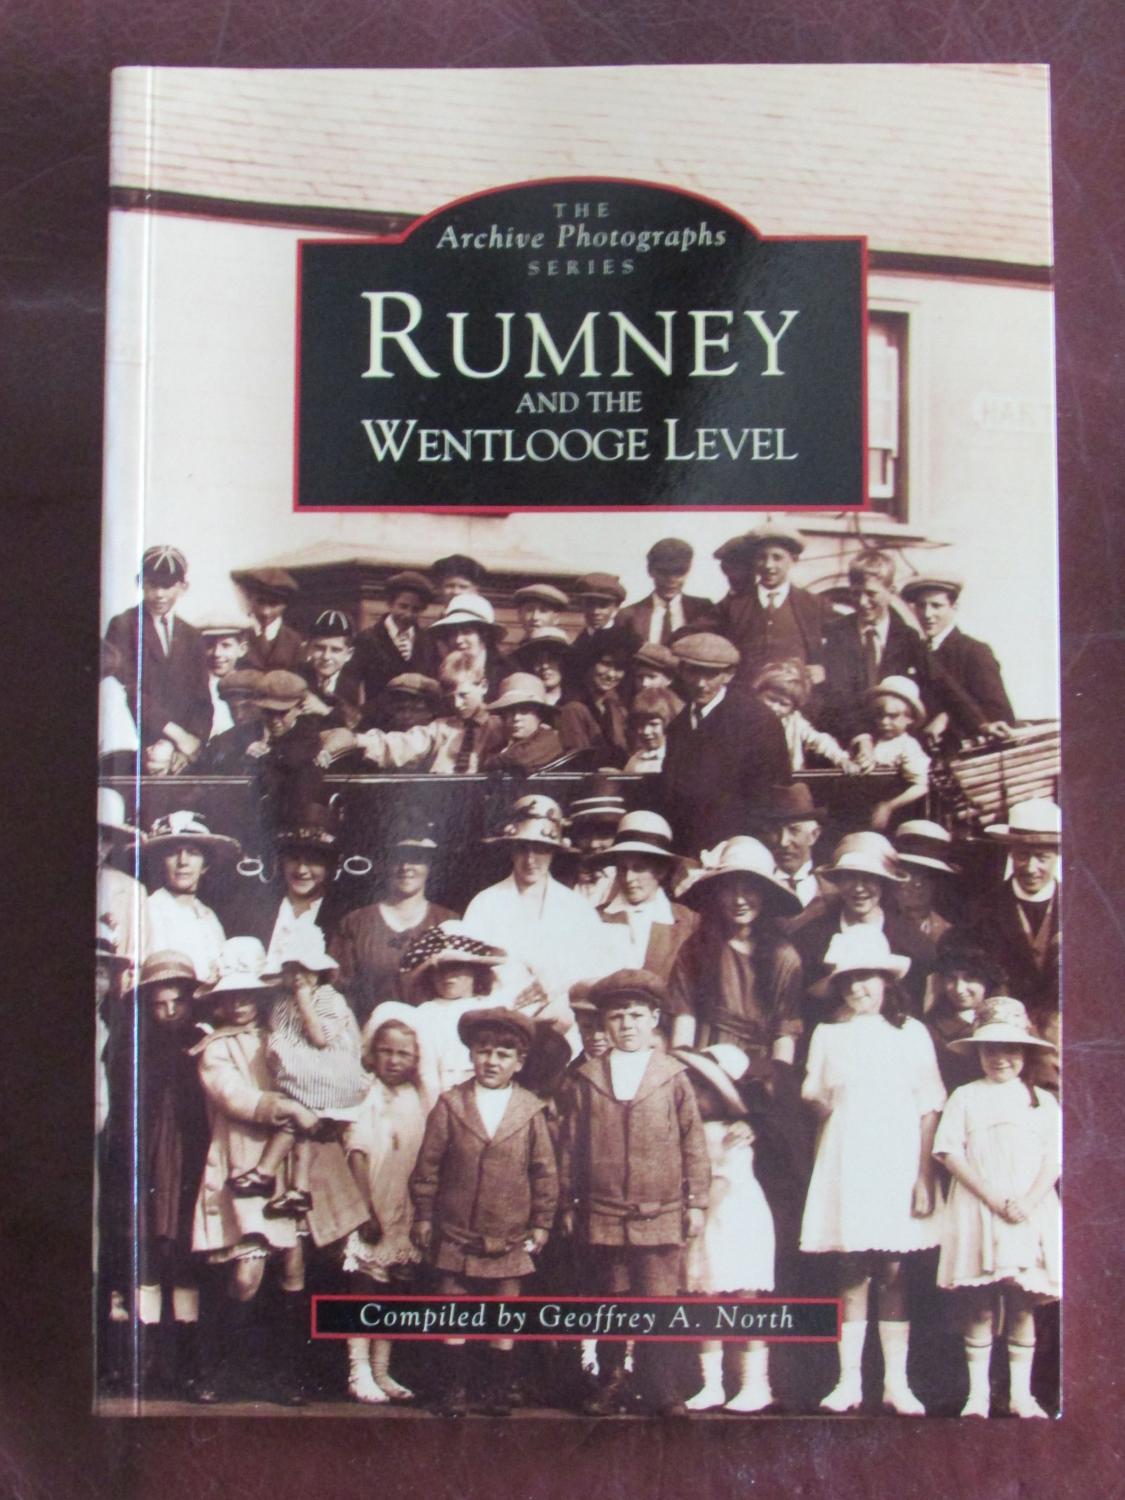 Rumney and the Wentlodge Level - the Archive Photographs Series - compiled by Geoffrey A NORTH